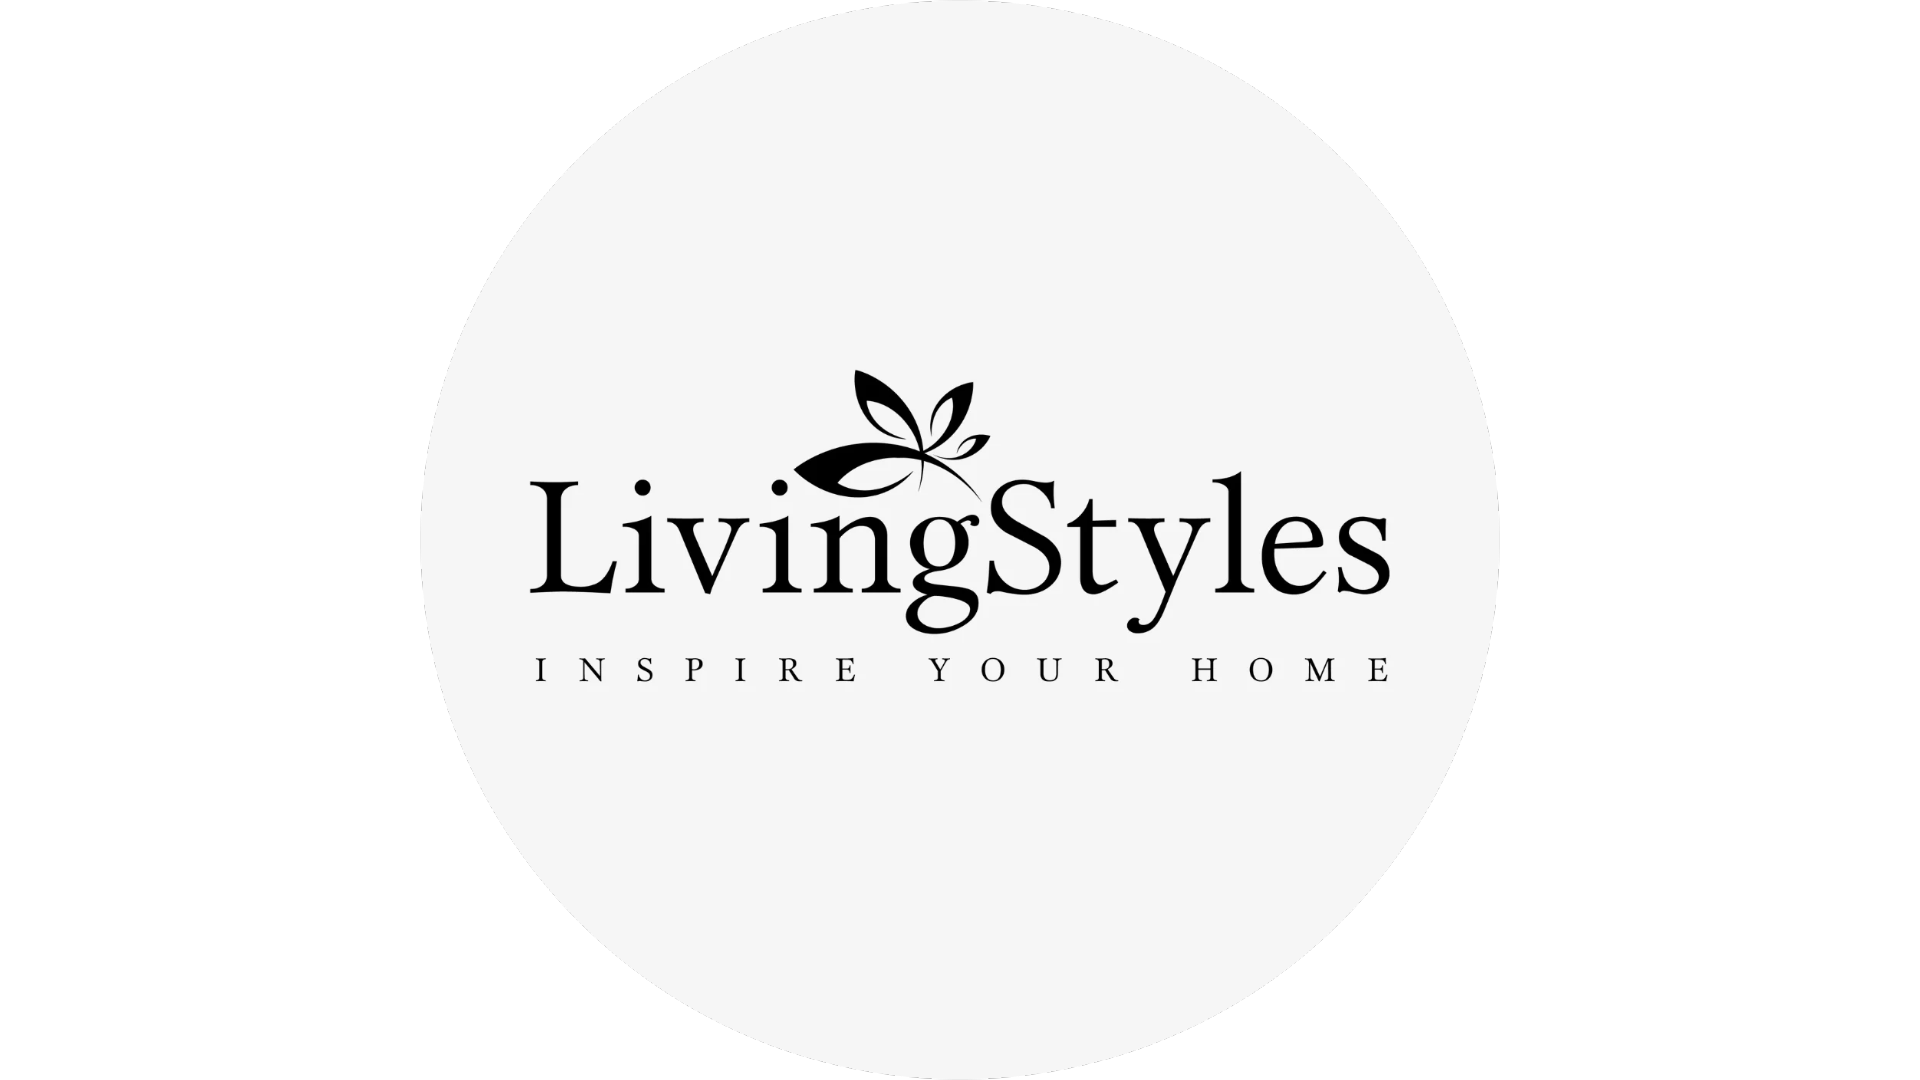 Get the Hamptons style with LivingStyles